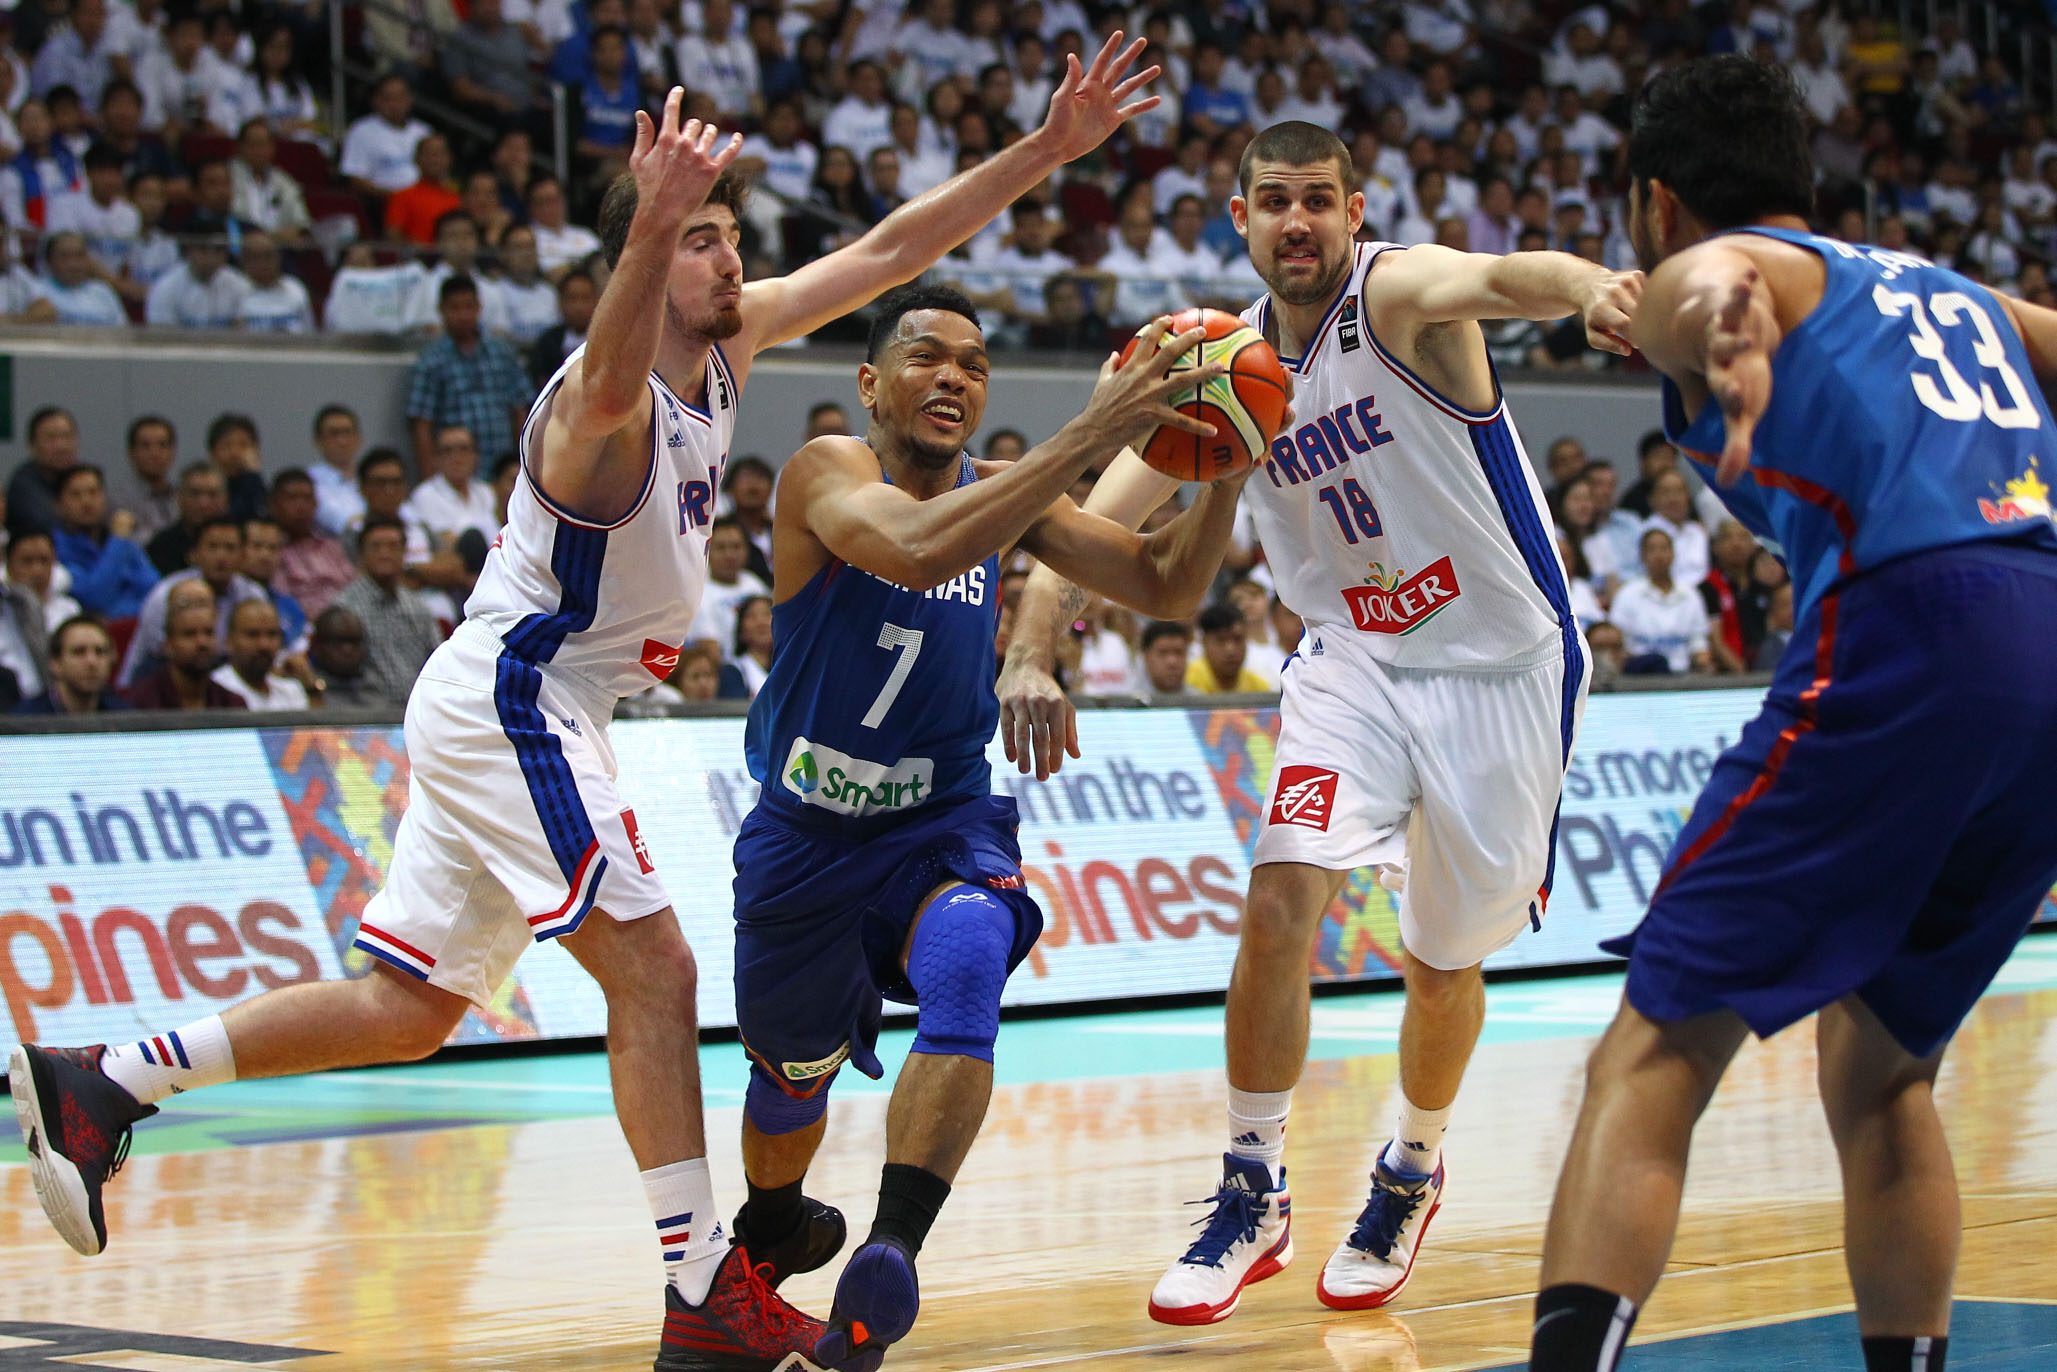 WATCH: Fearless Jayson Castro slashes for and-1 play